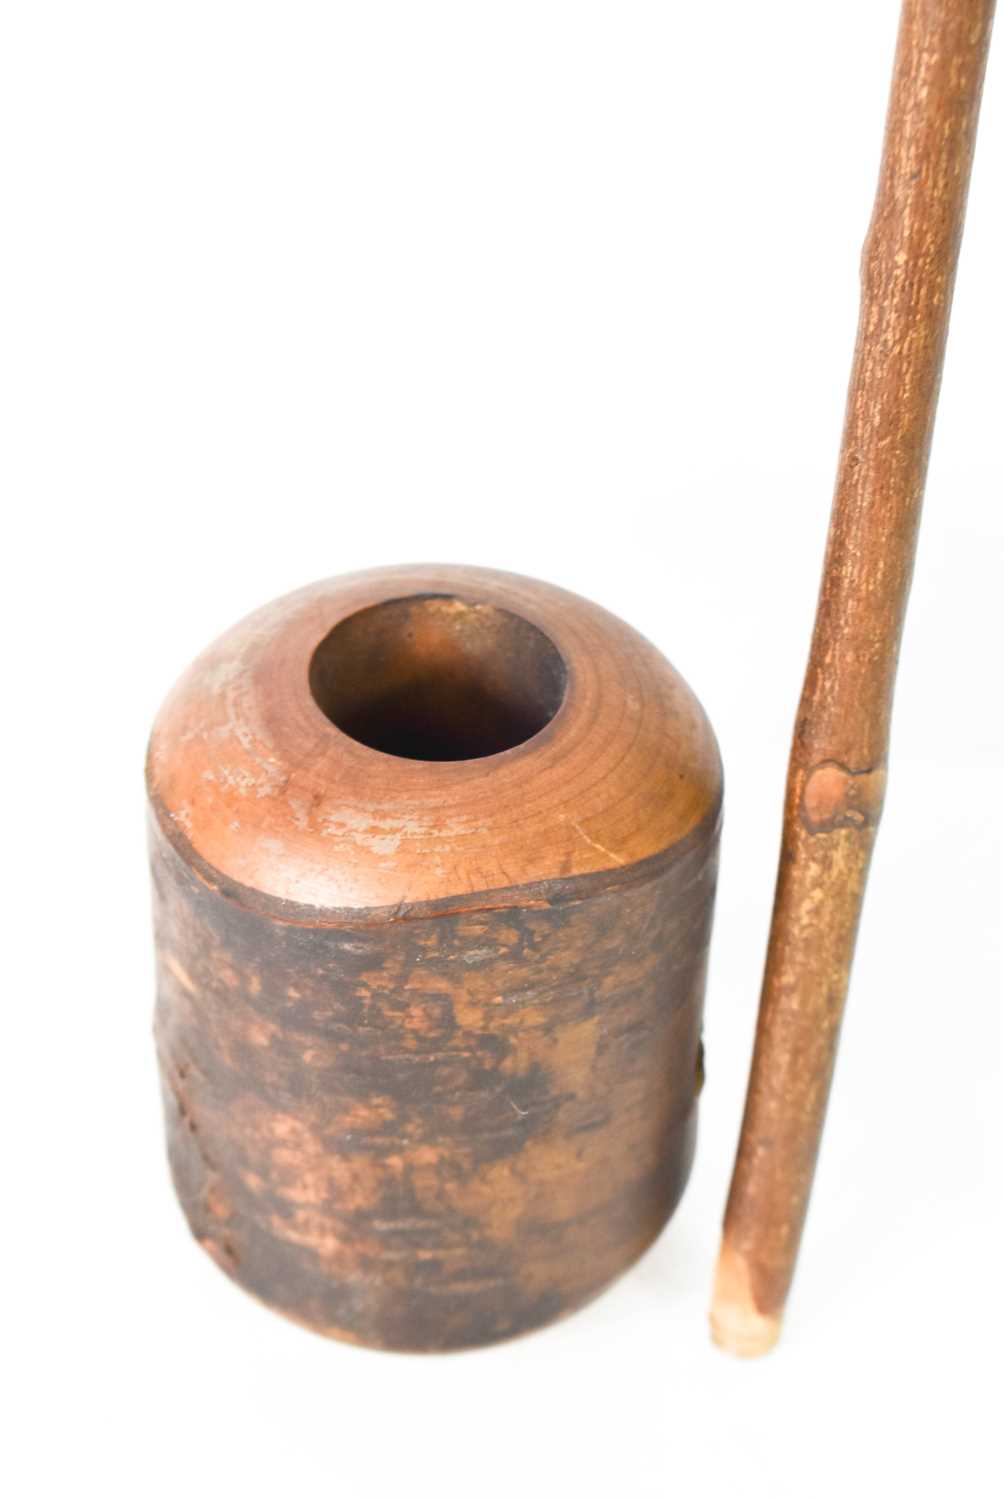 An early 19th century treen pipe, likely birchwood, the bowl carved from a branch in the solid, - Image 2 of 3